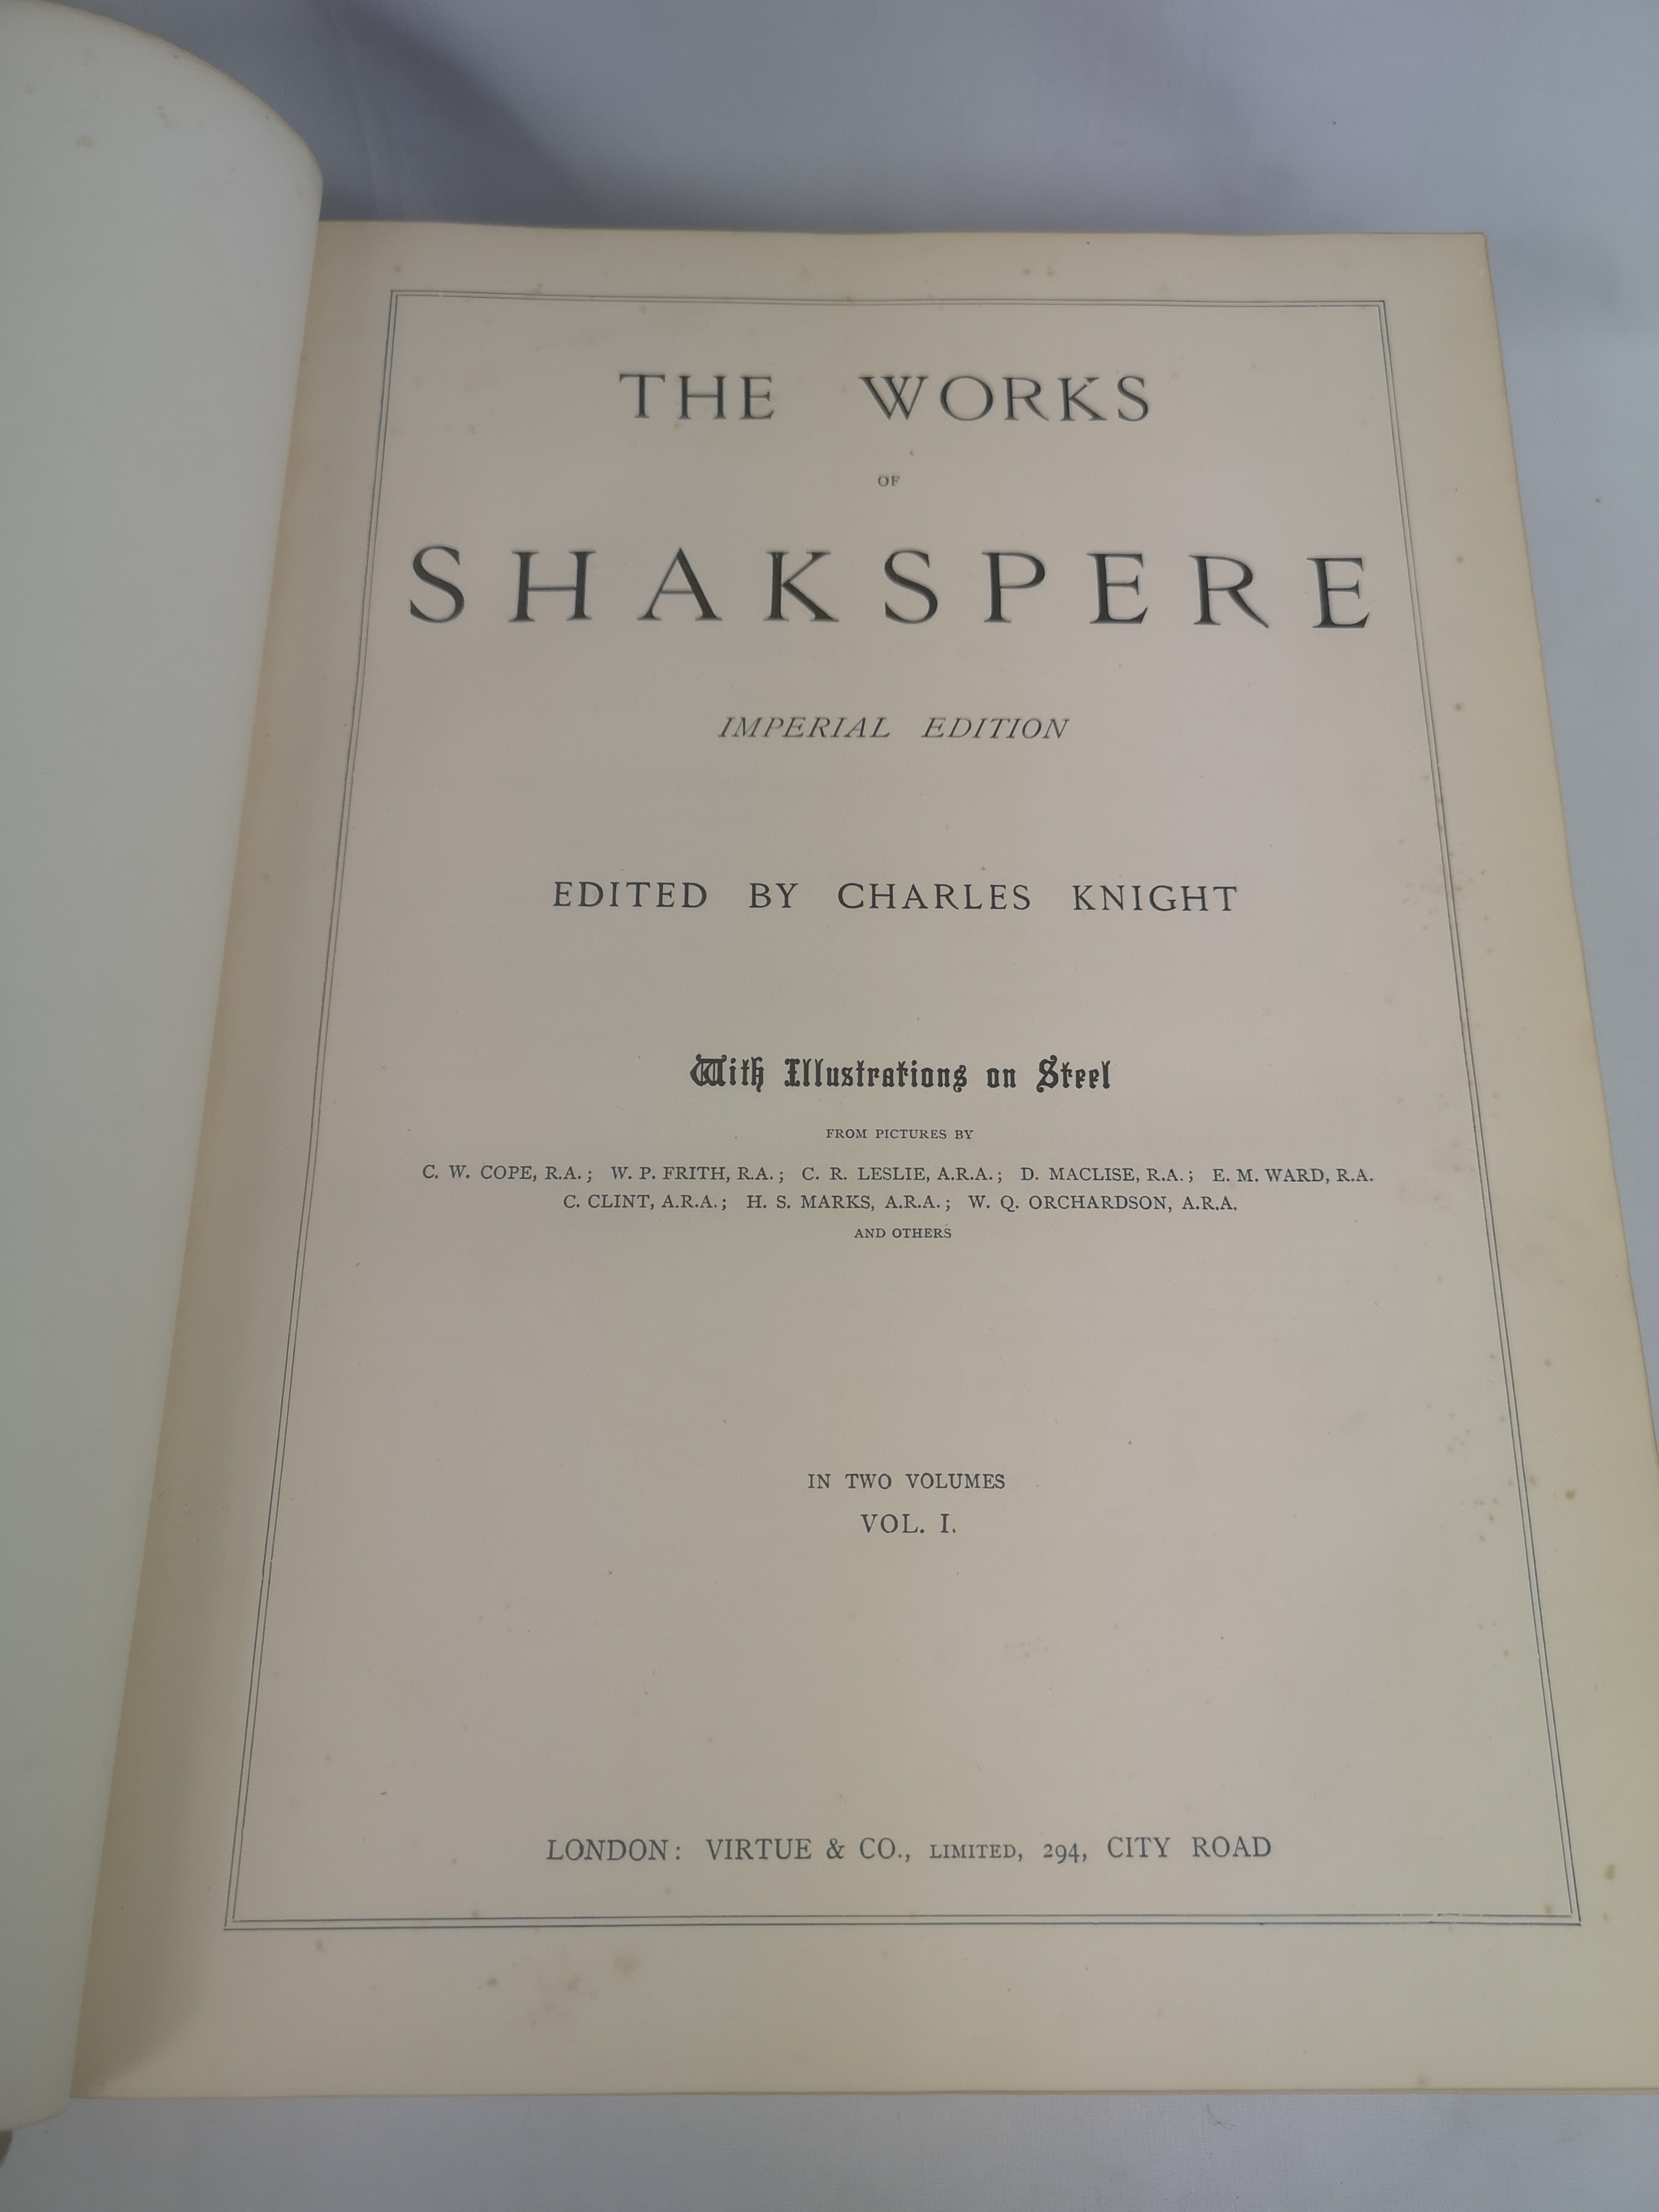 The Works of Shakspere Imperial Edition - Image 3 of 5